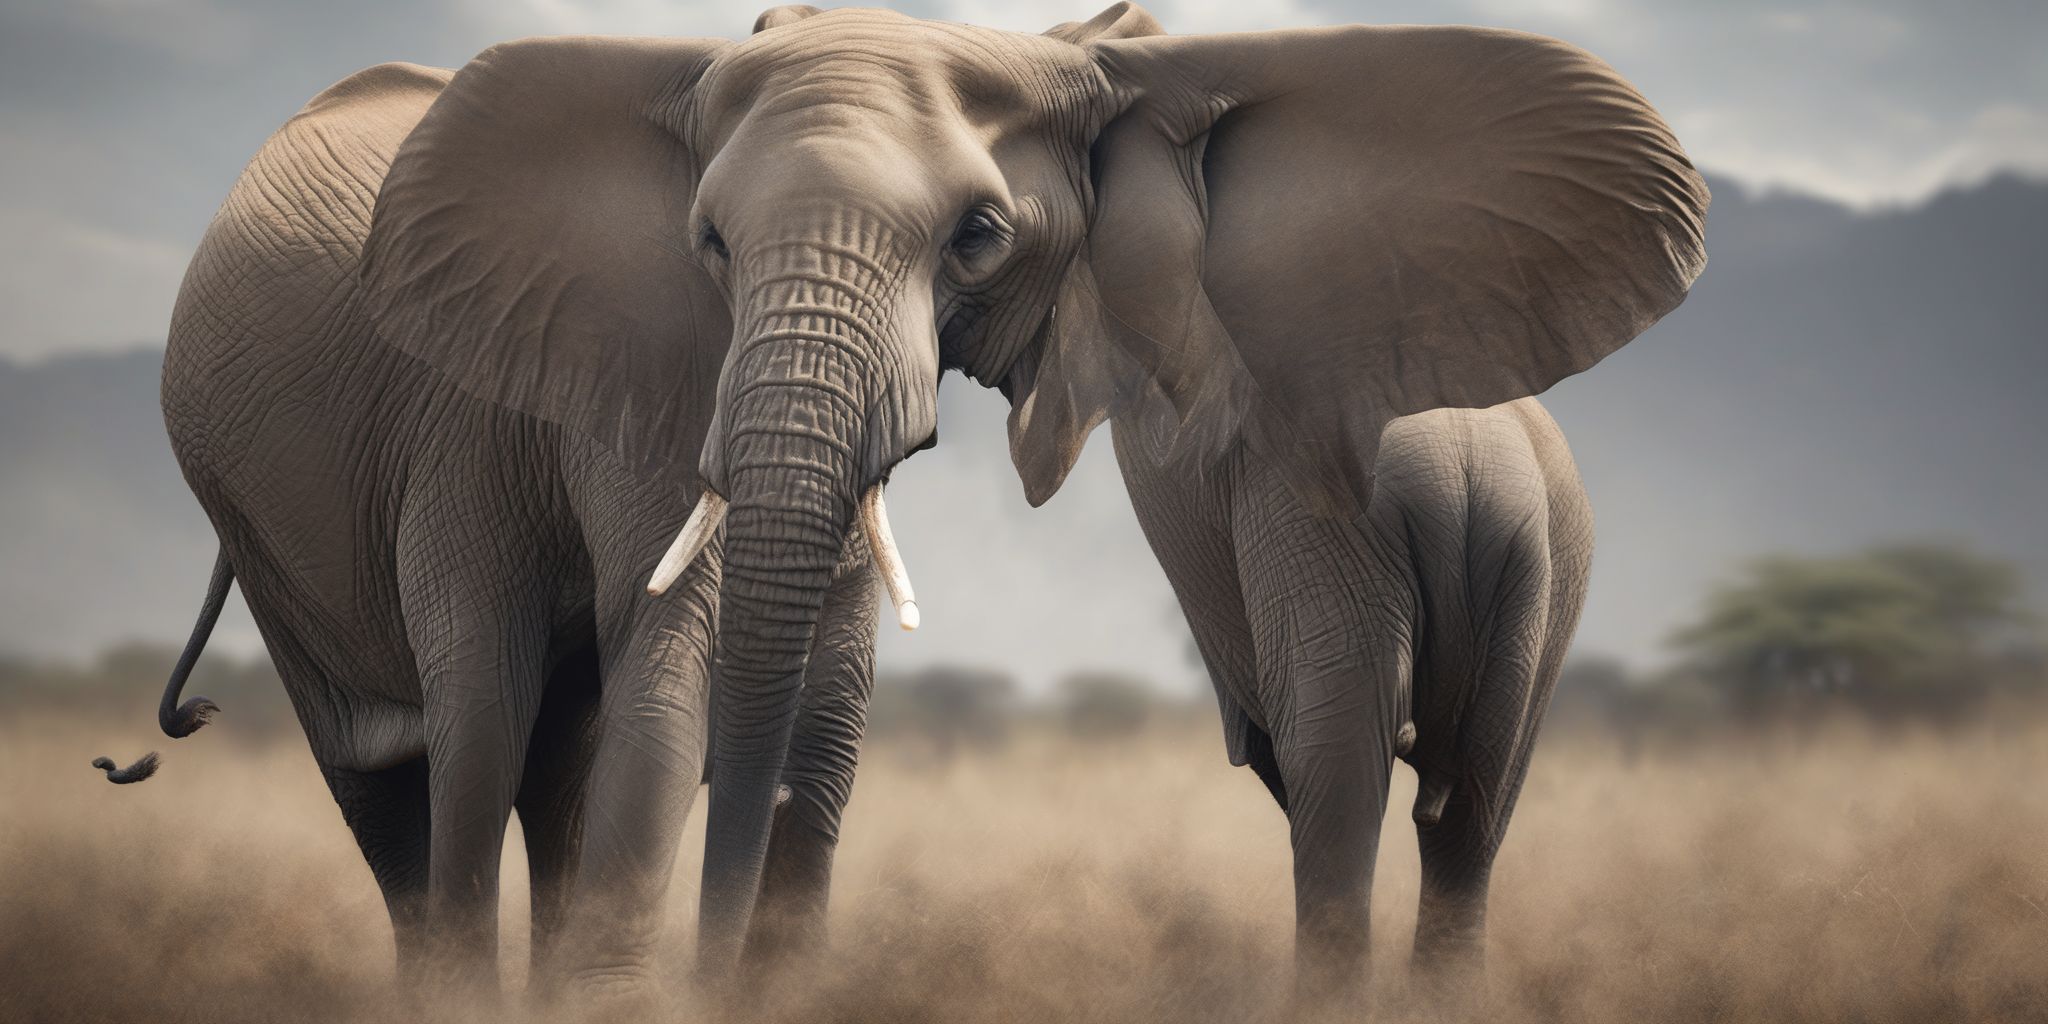 Elephant  in realistic, photographic style